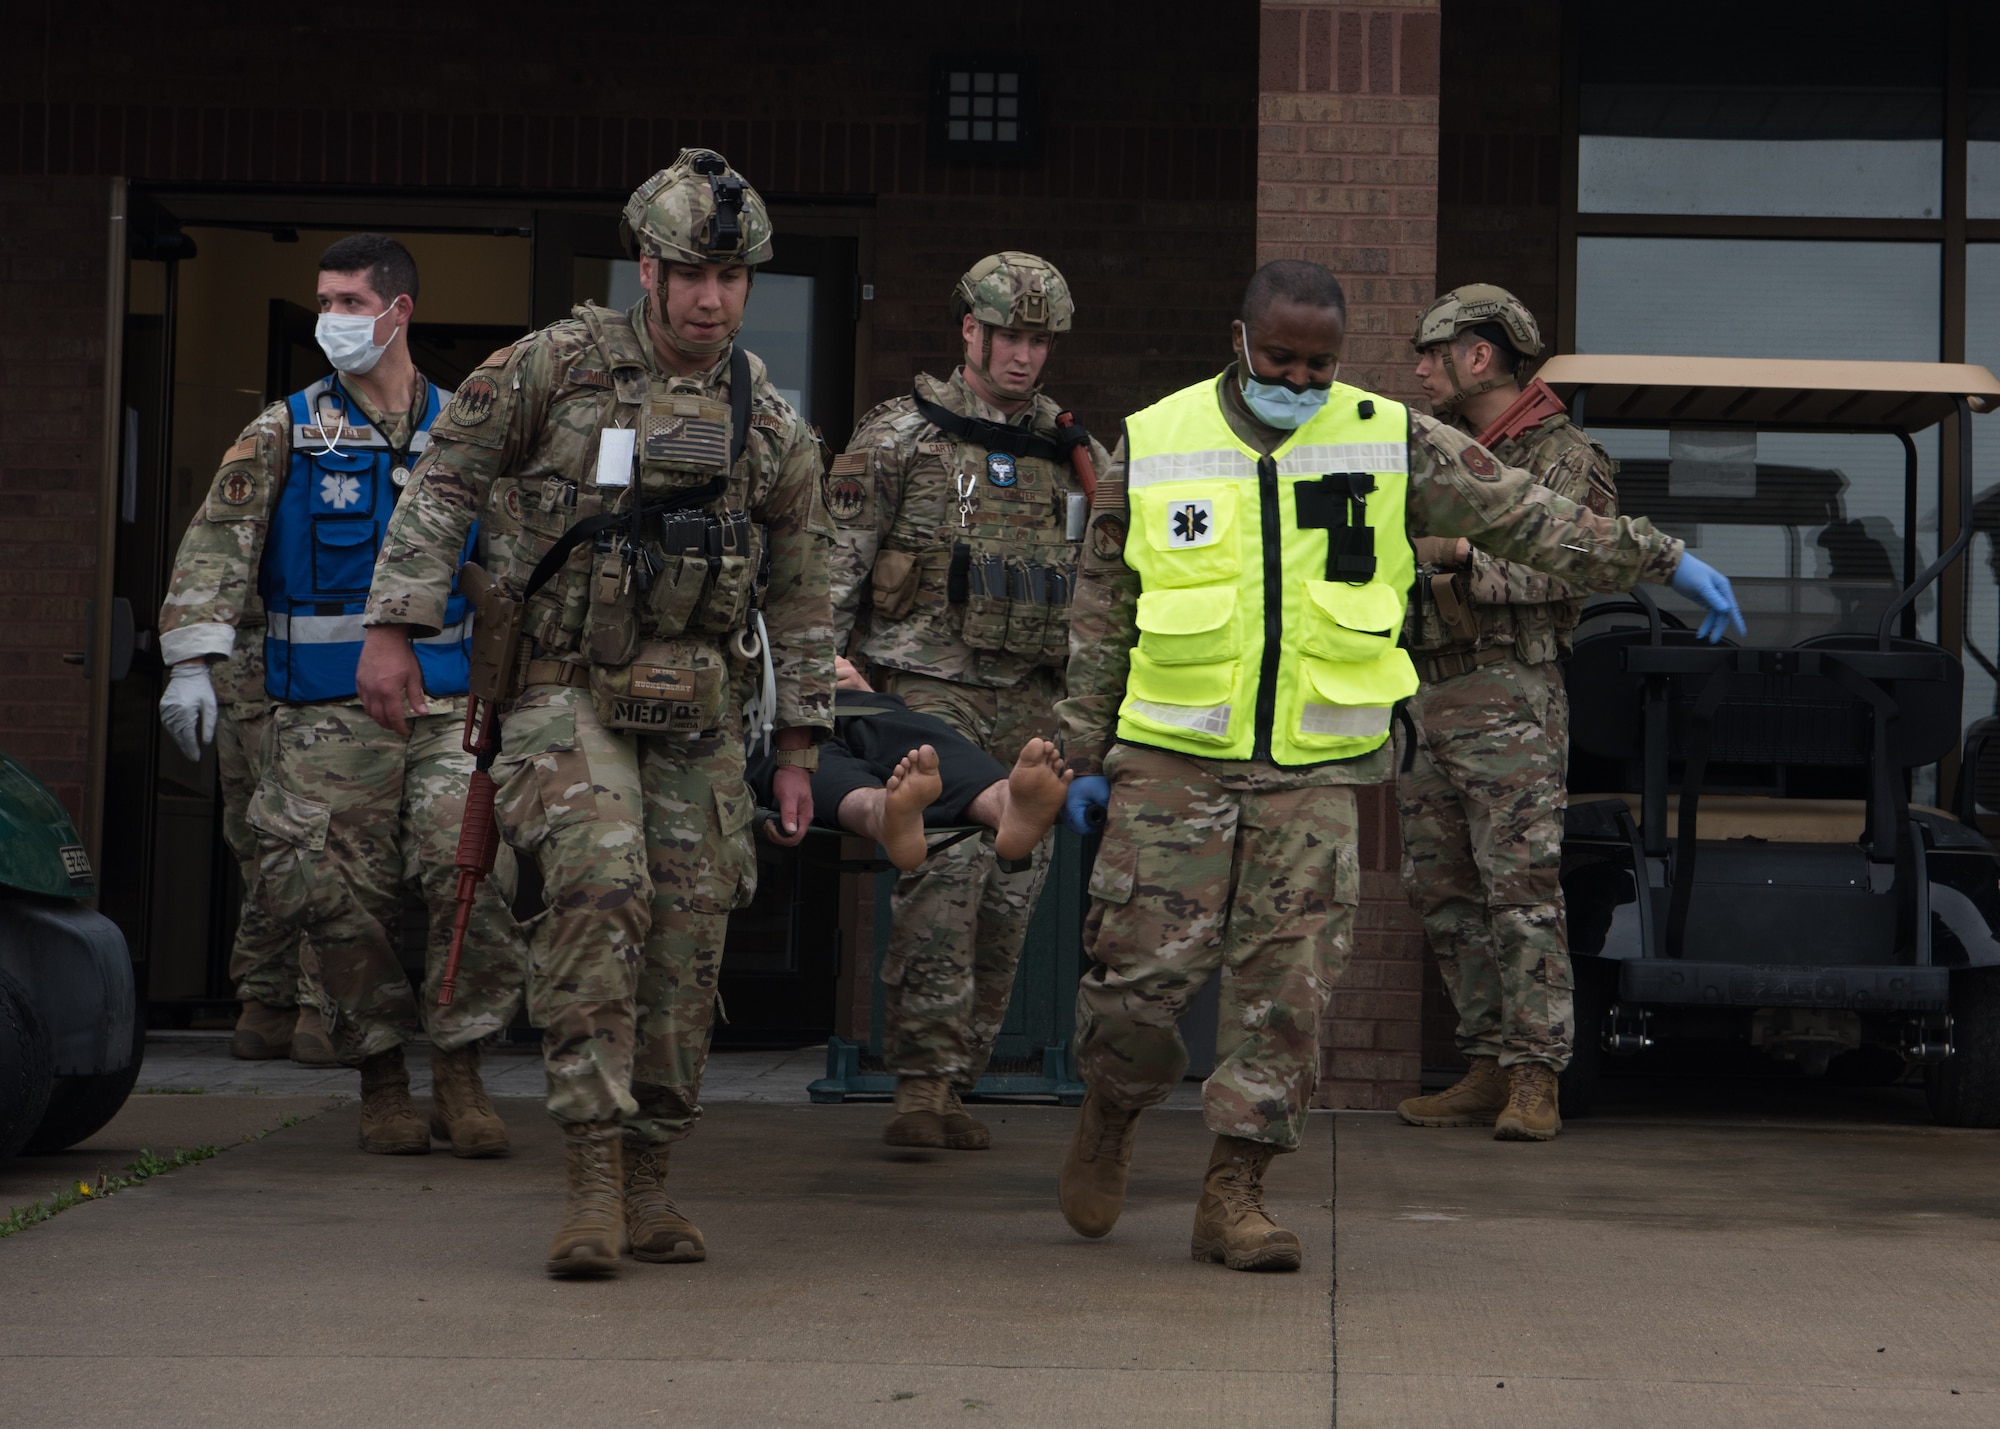 Airmen carry a simulated casualty on a stretcher.